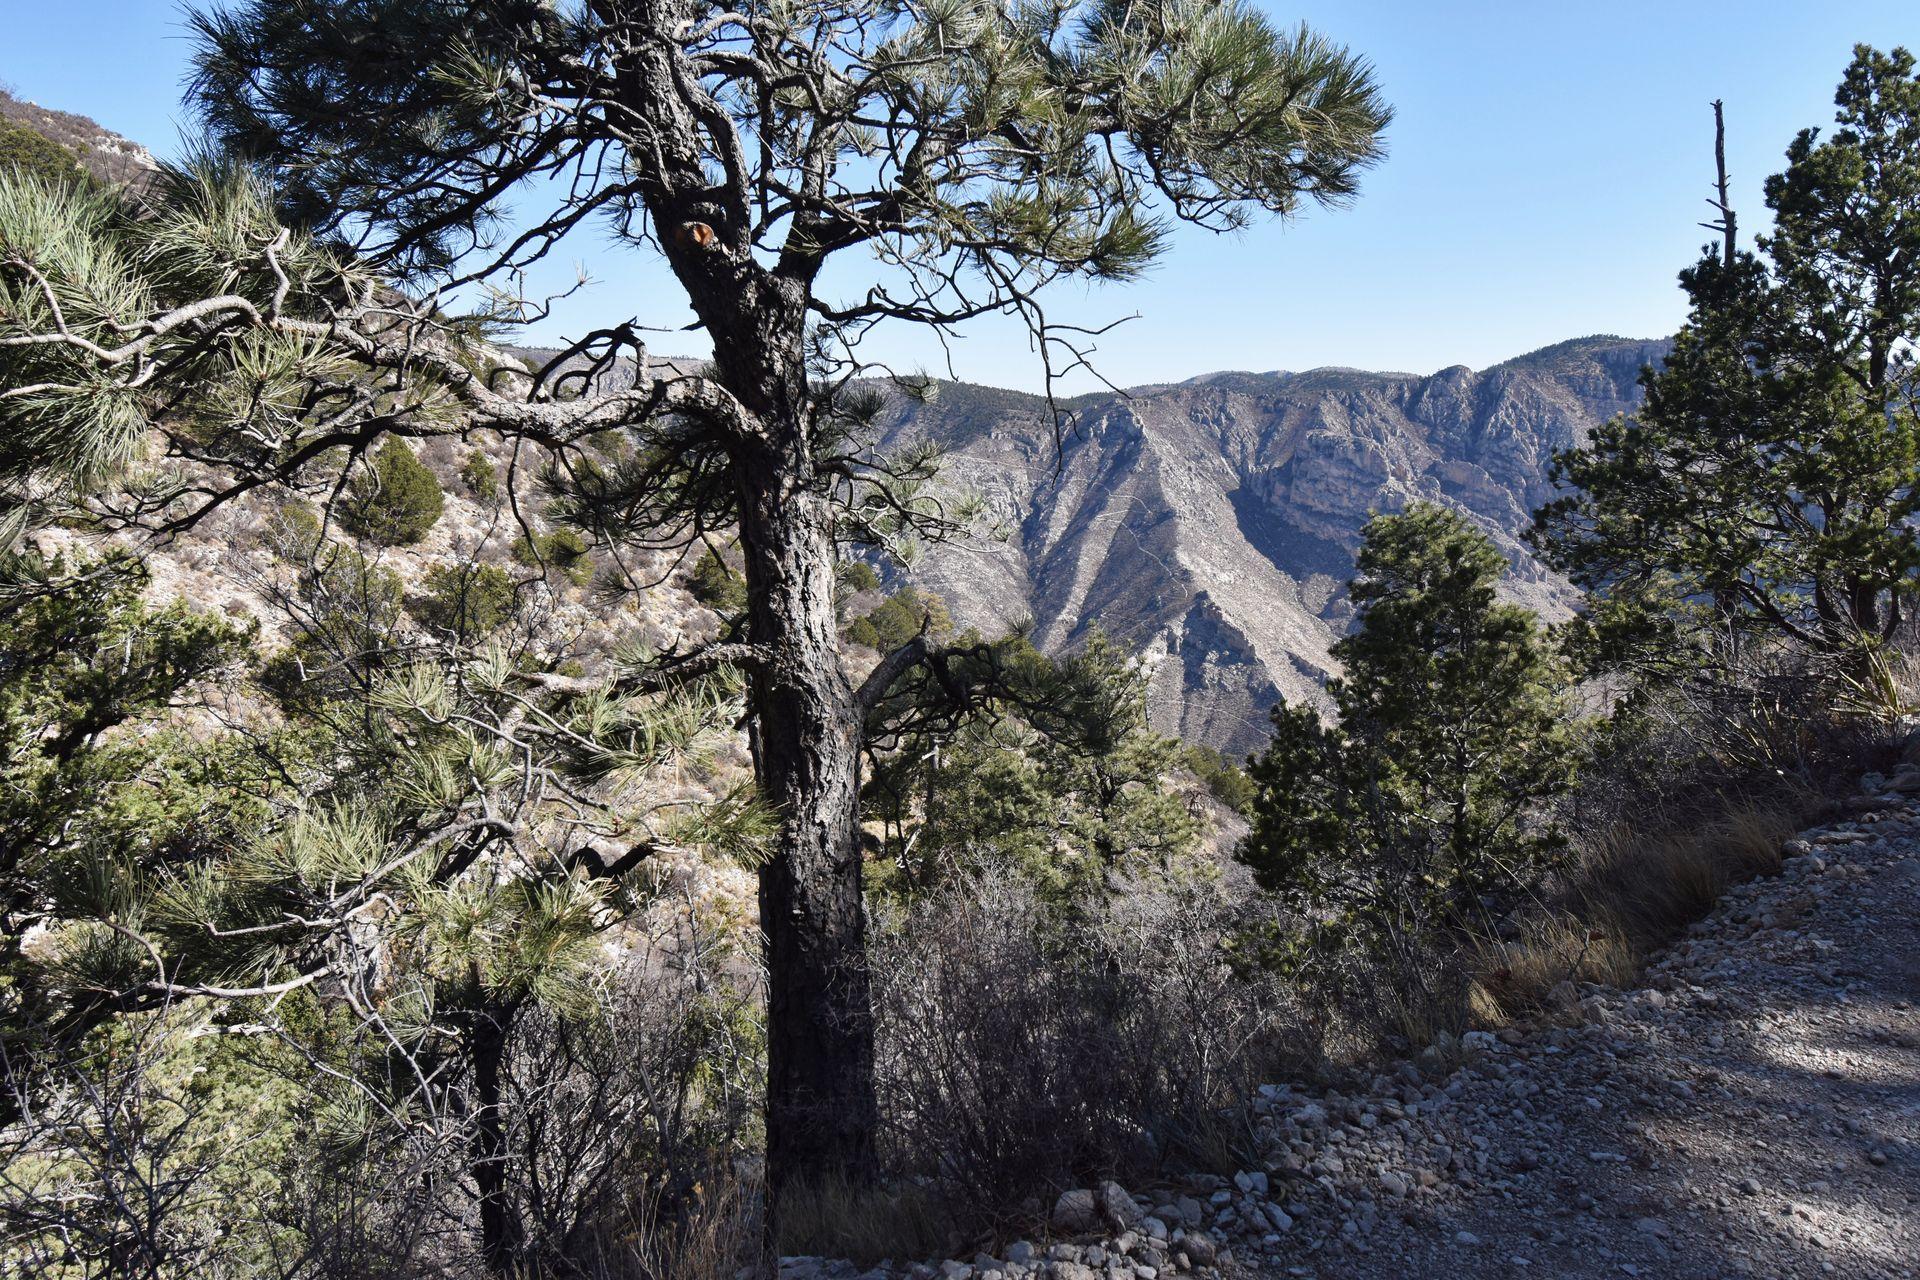 Looking at a forested section of the Guadalupe Peak trail. There is a view of mountains in the background.